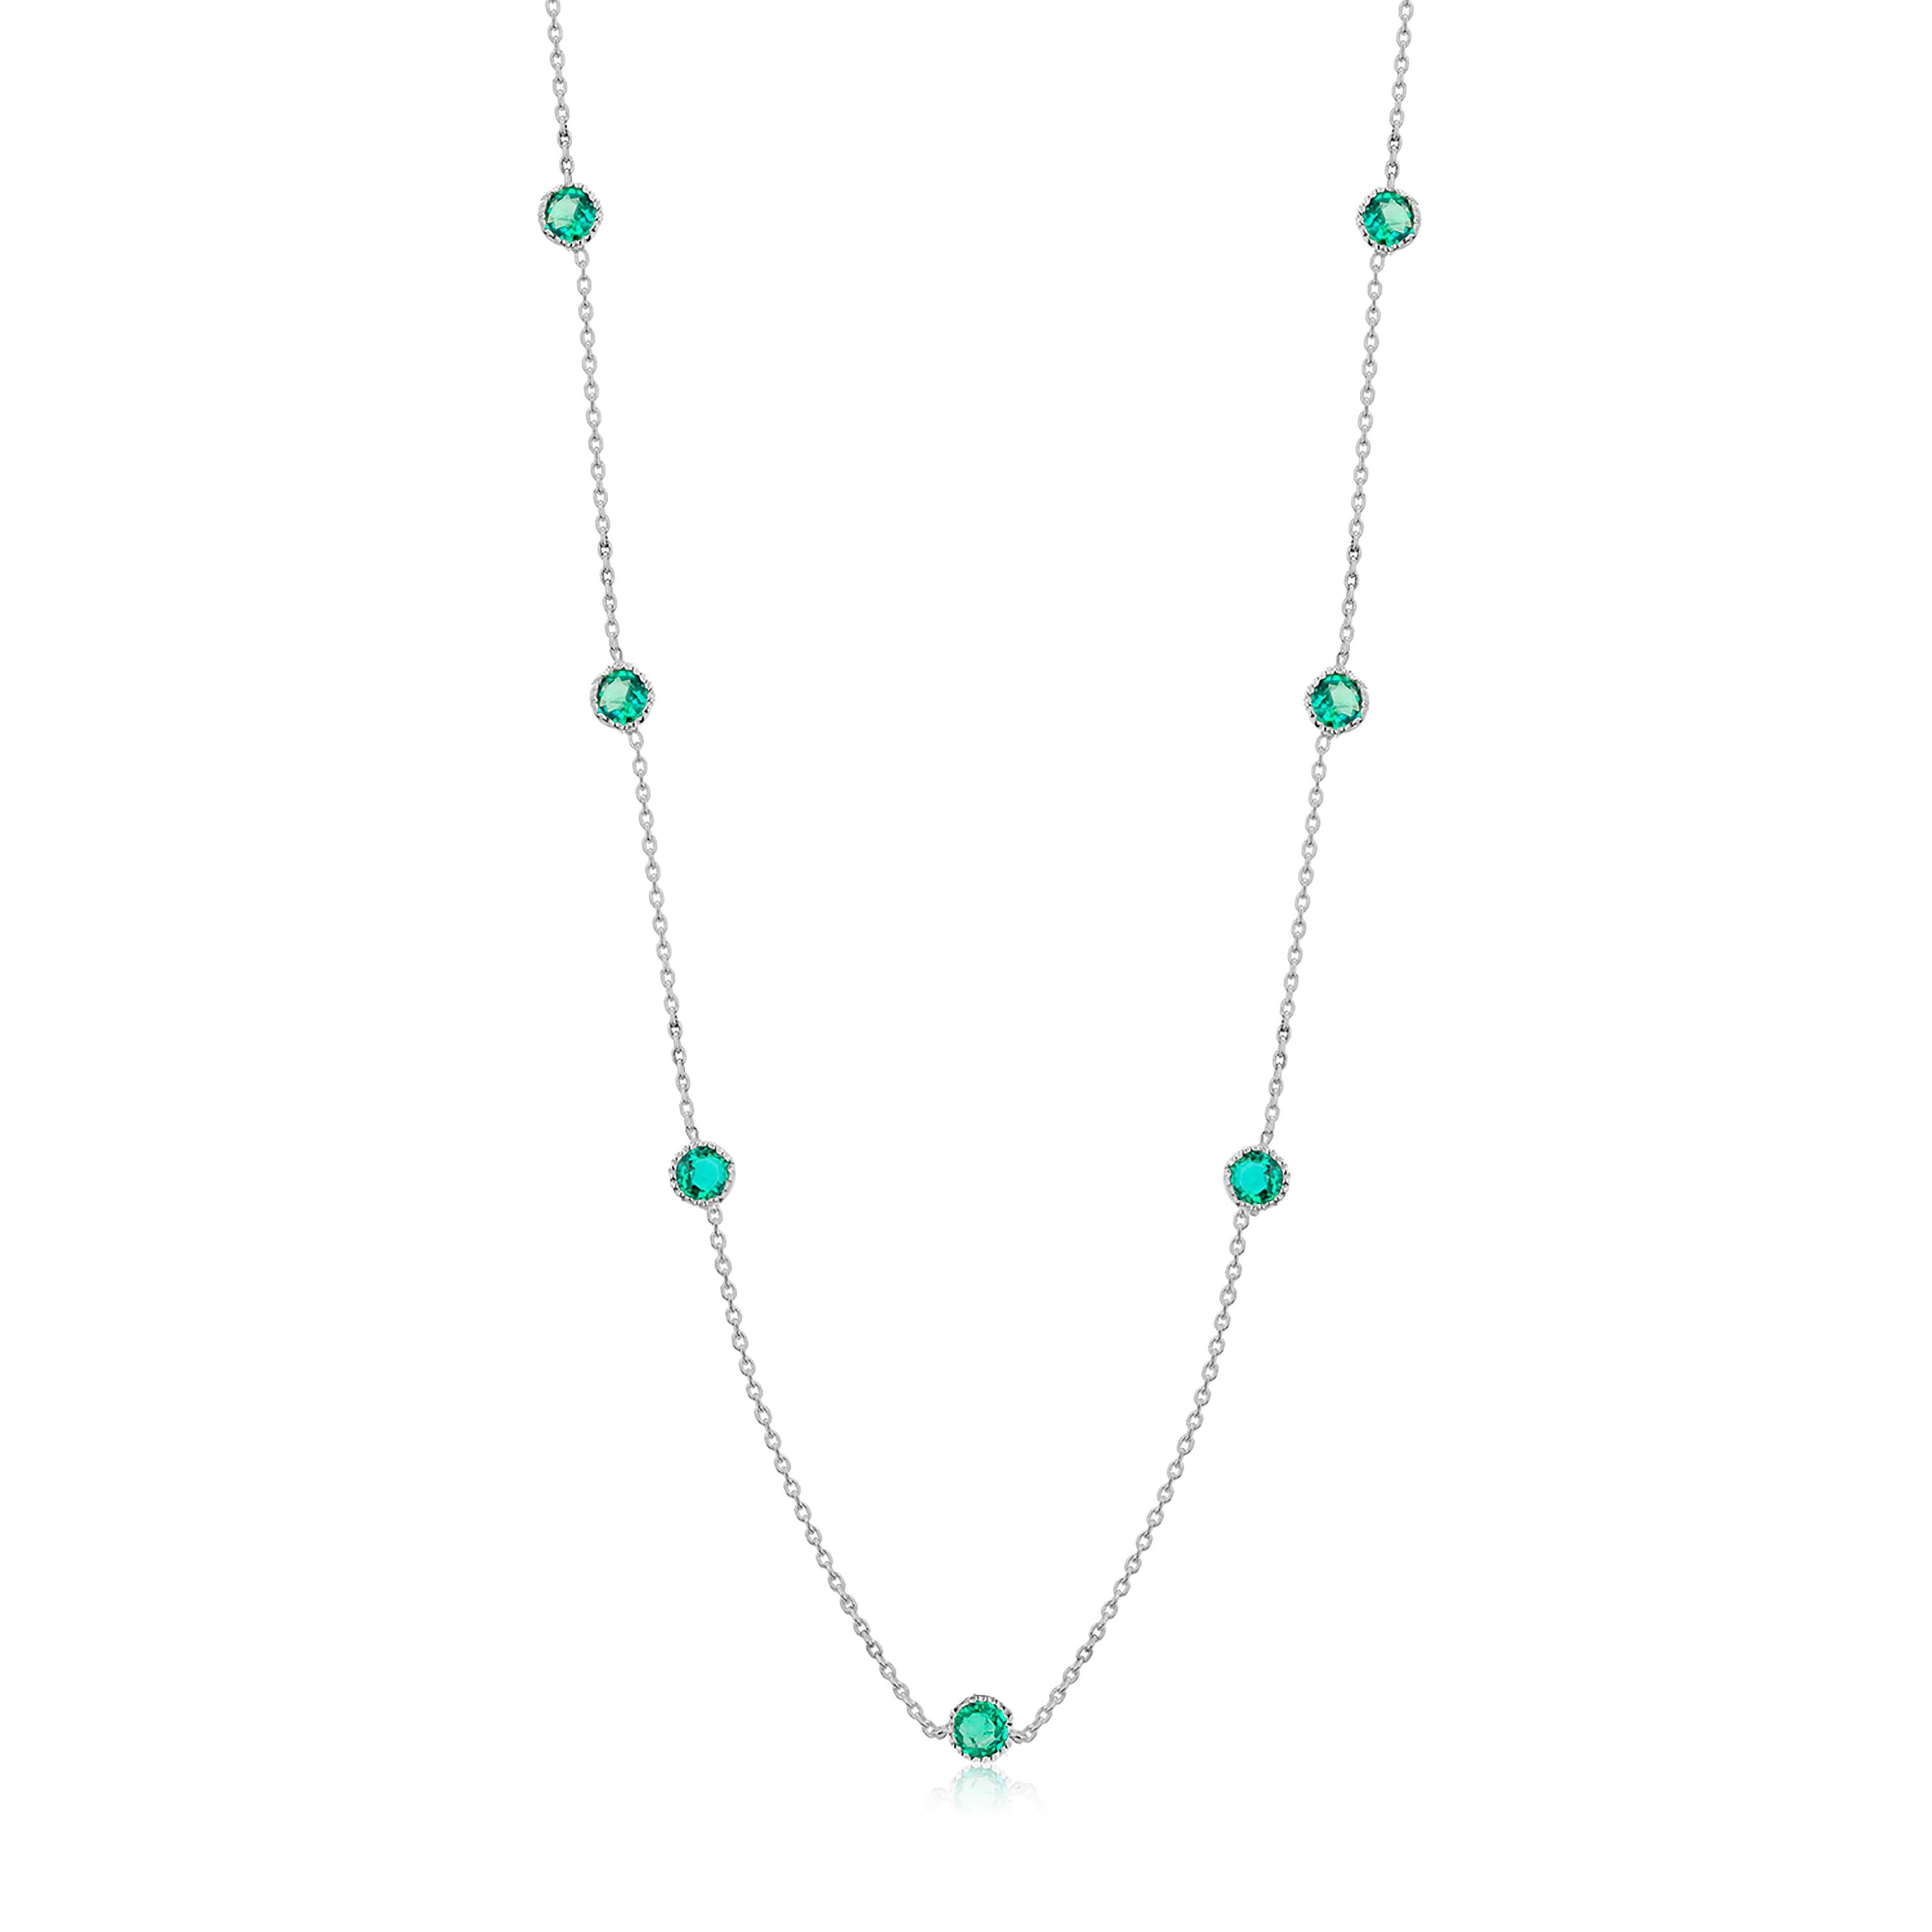 14 karat white gold seven-station bezel necklace 
Necklace measuring 16 inches long
Seven bezel-set round emeralds weigh 1.05 carats 
Round emeralds measuring 3 millimeters each
Each bezel is designed with a fine millgrain edge
Emerald hue tone